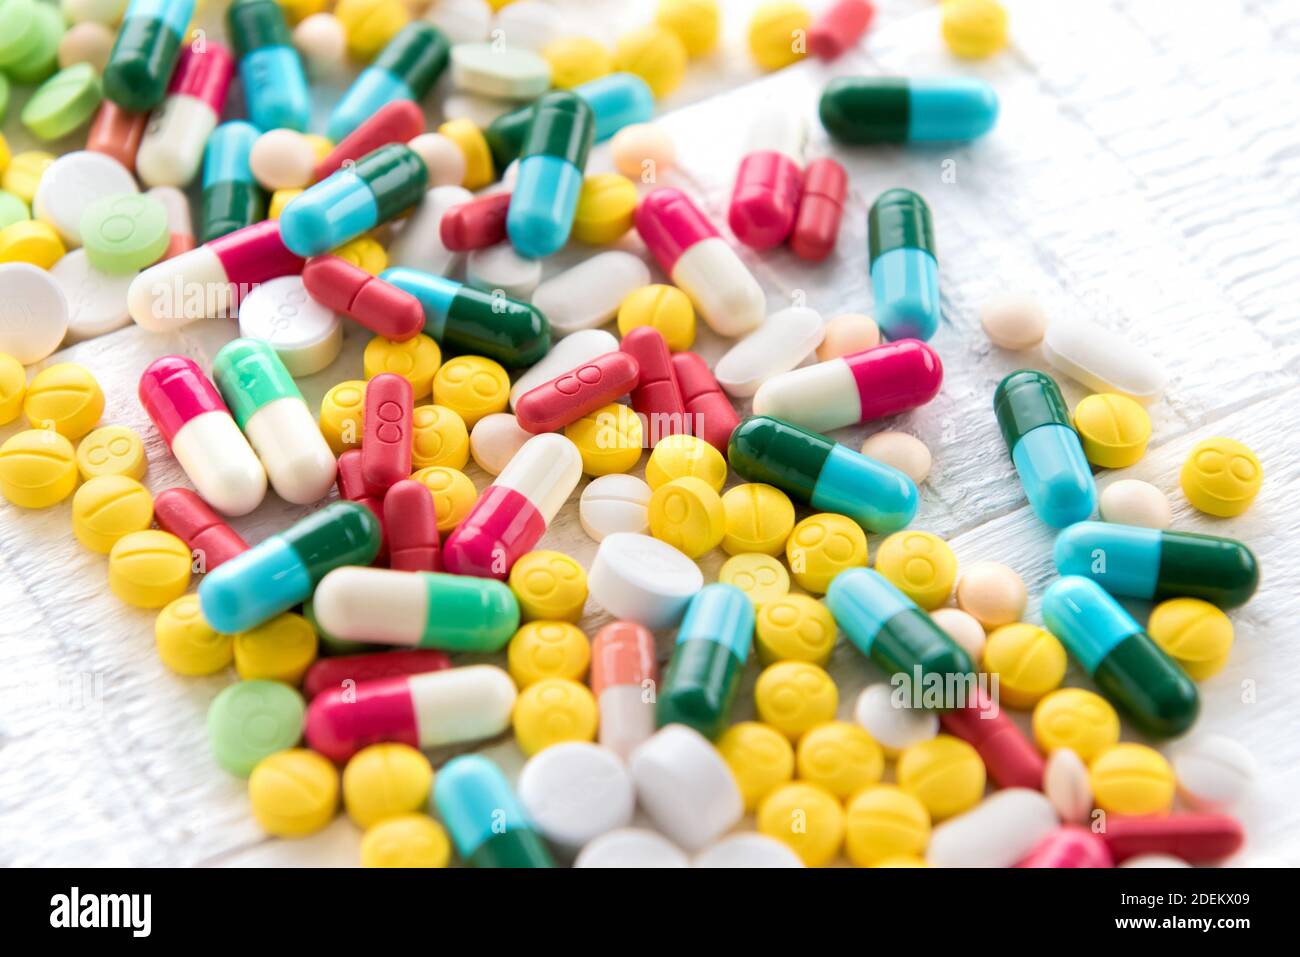 Mixed colorful pharmaceutical drugs and medicine in pill and capsule form on white table Stock Photo